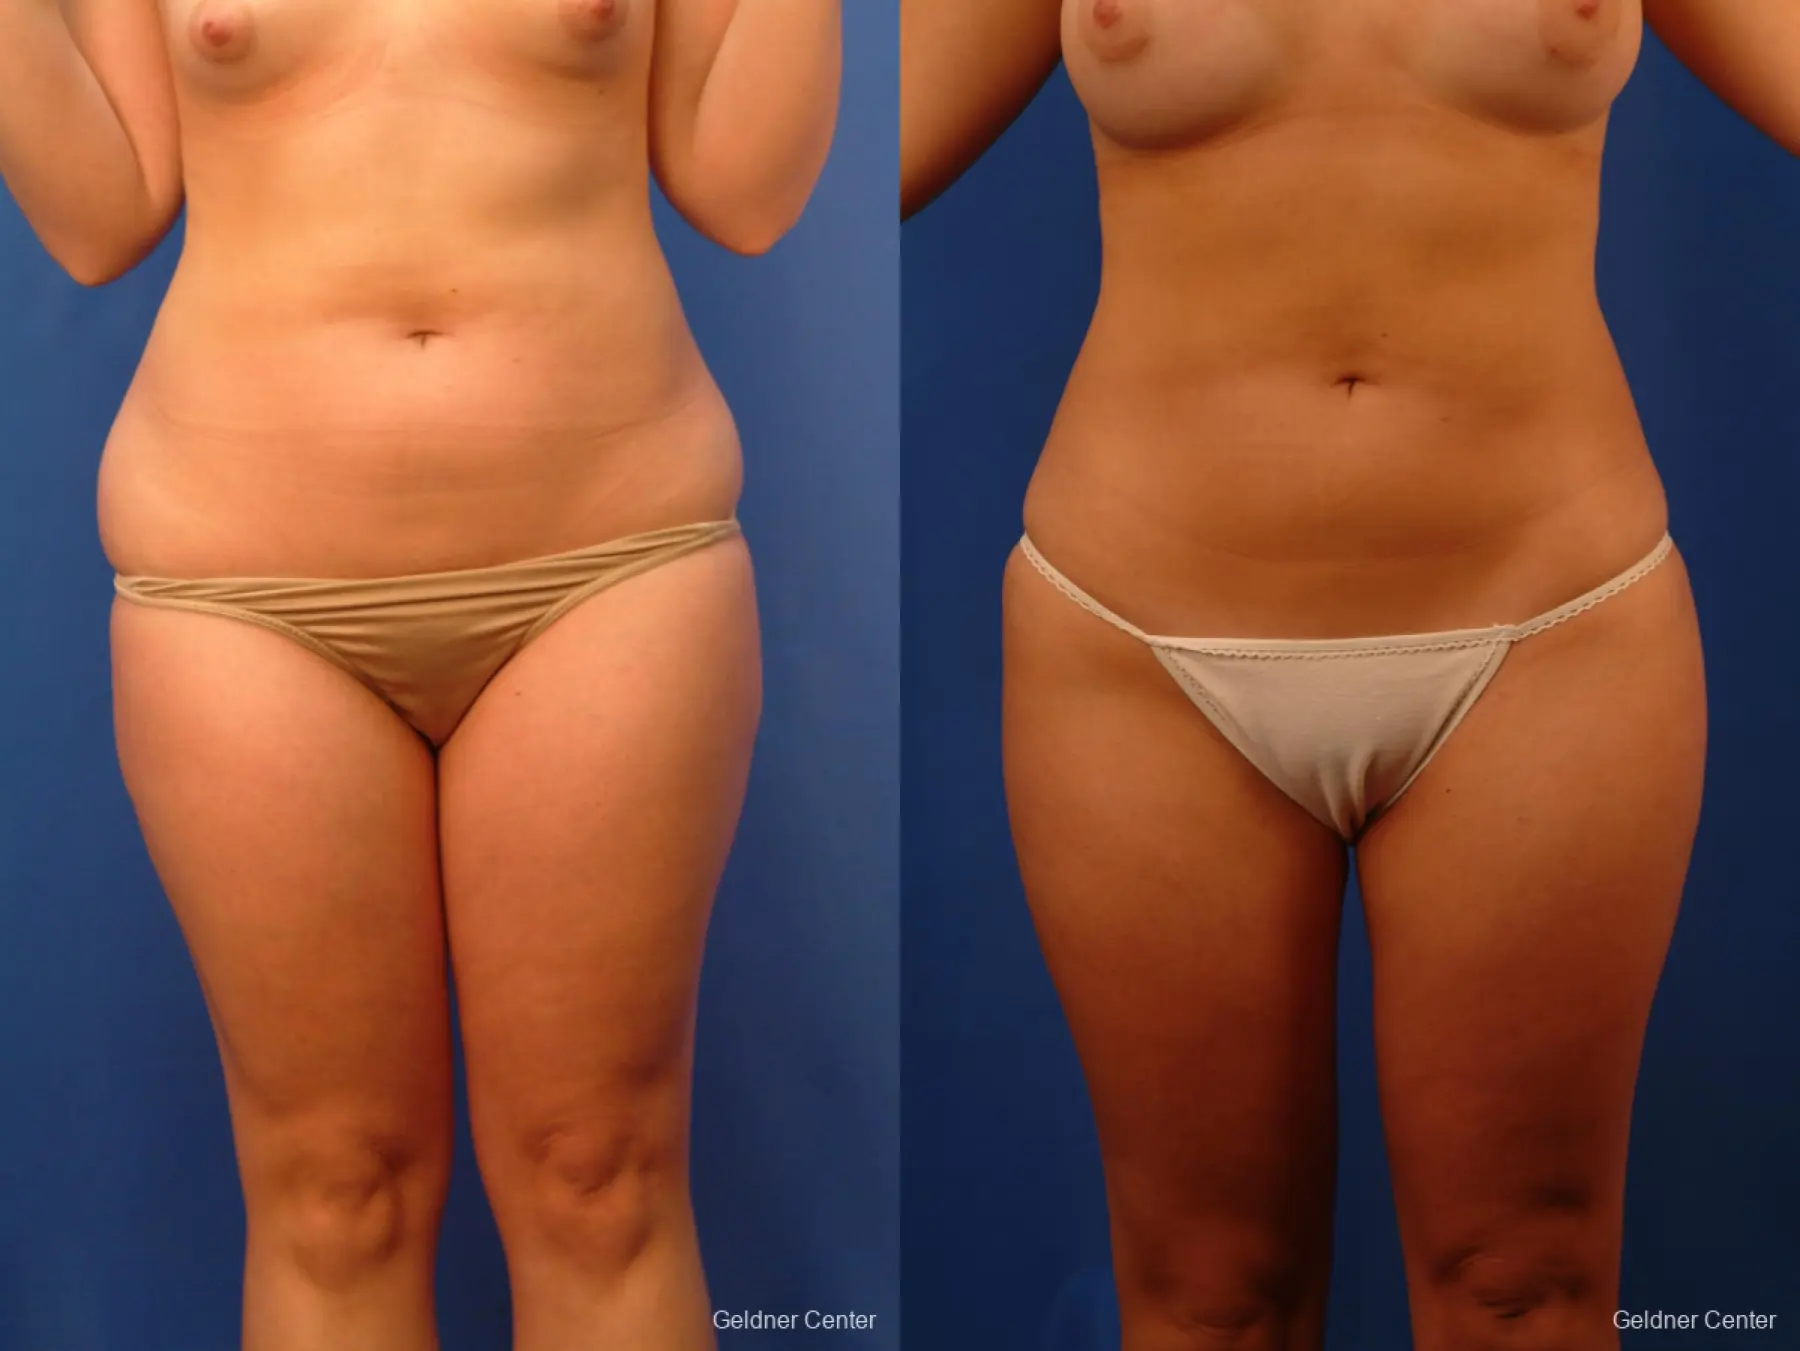 Vaser lipo patient 2516 before and after photos - Before and After 1